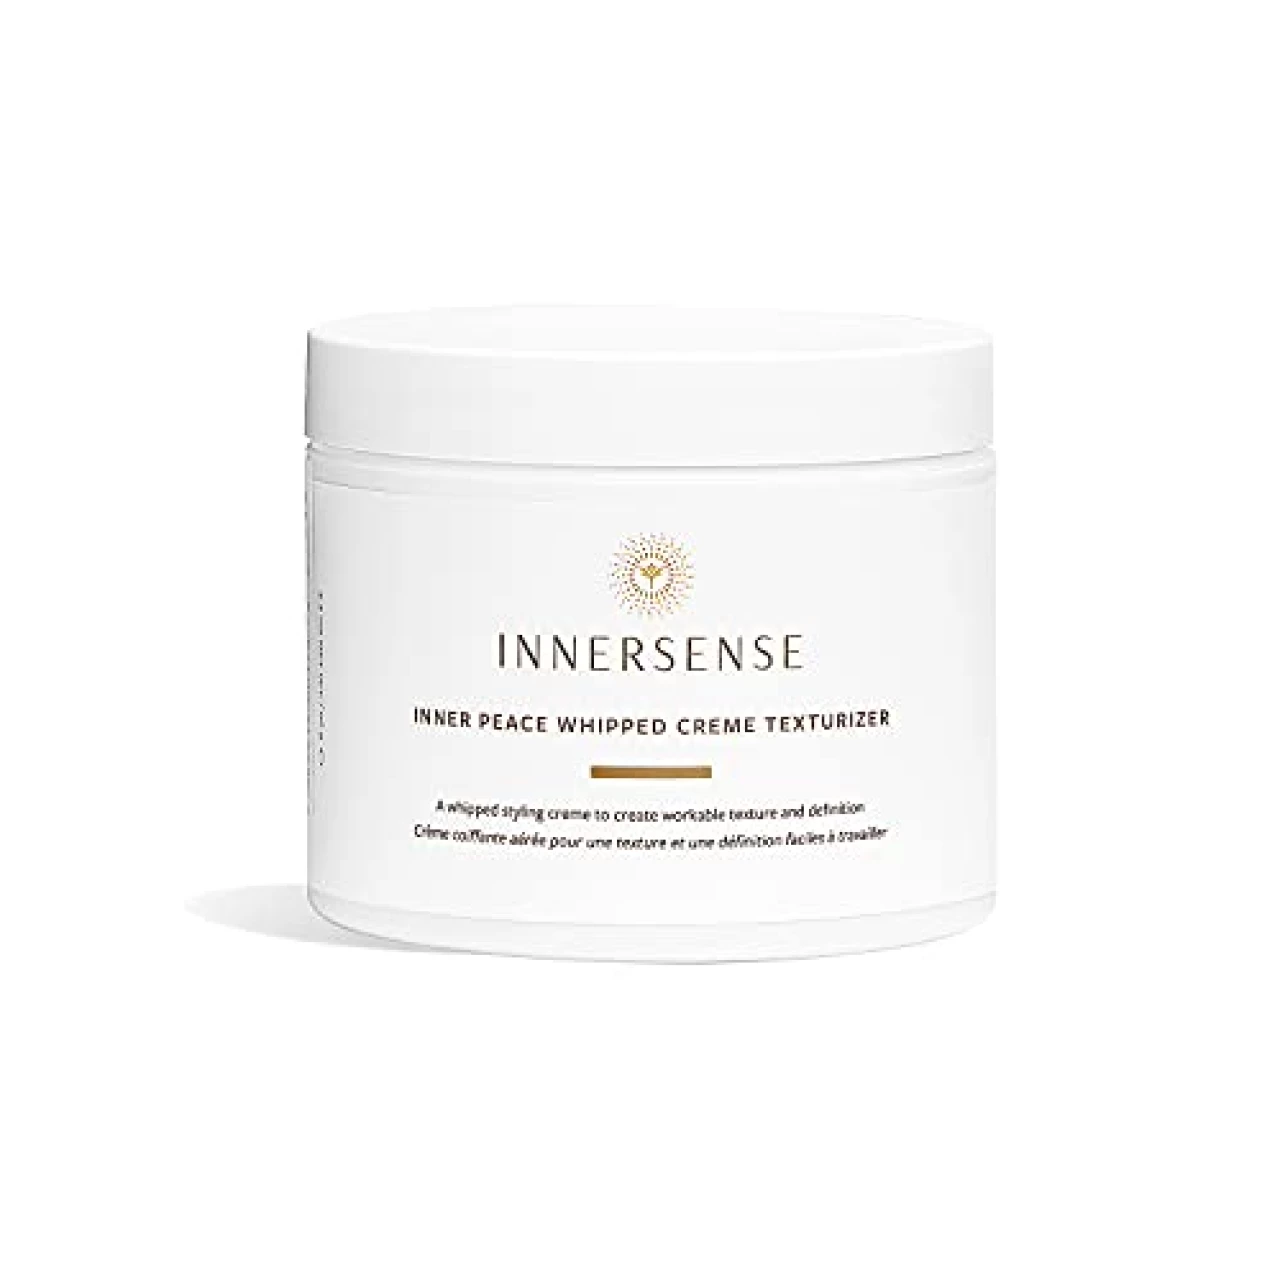 INNERSENSE Organic Beauty - Natural Inner Peace Whipped Creme Texturizer | Cruelty-Free, Clean Haircare (3.4oz)